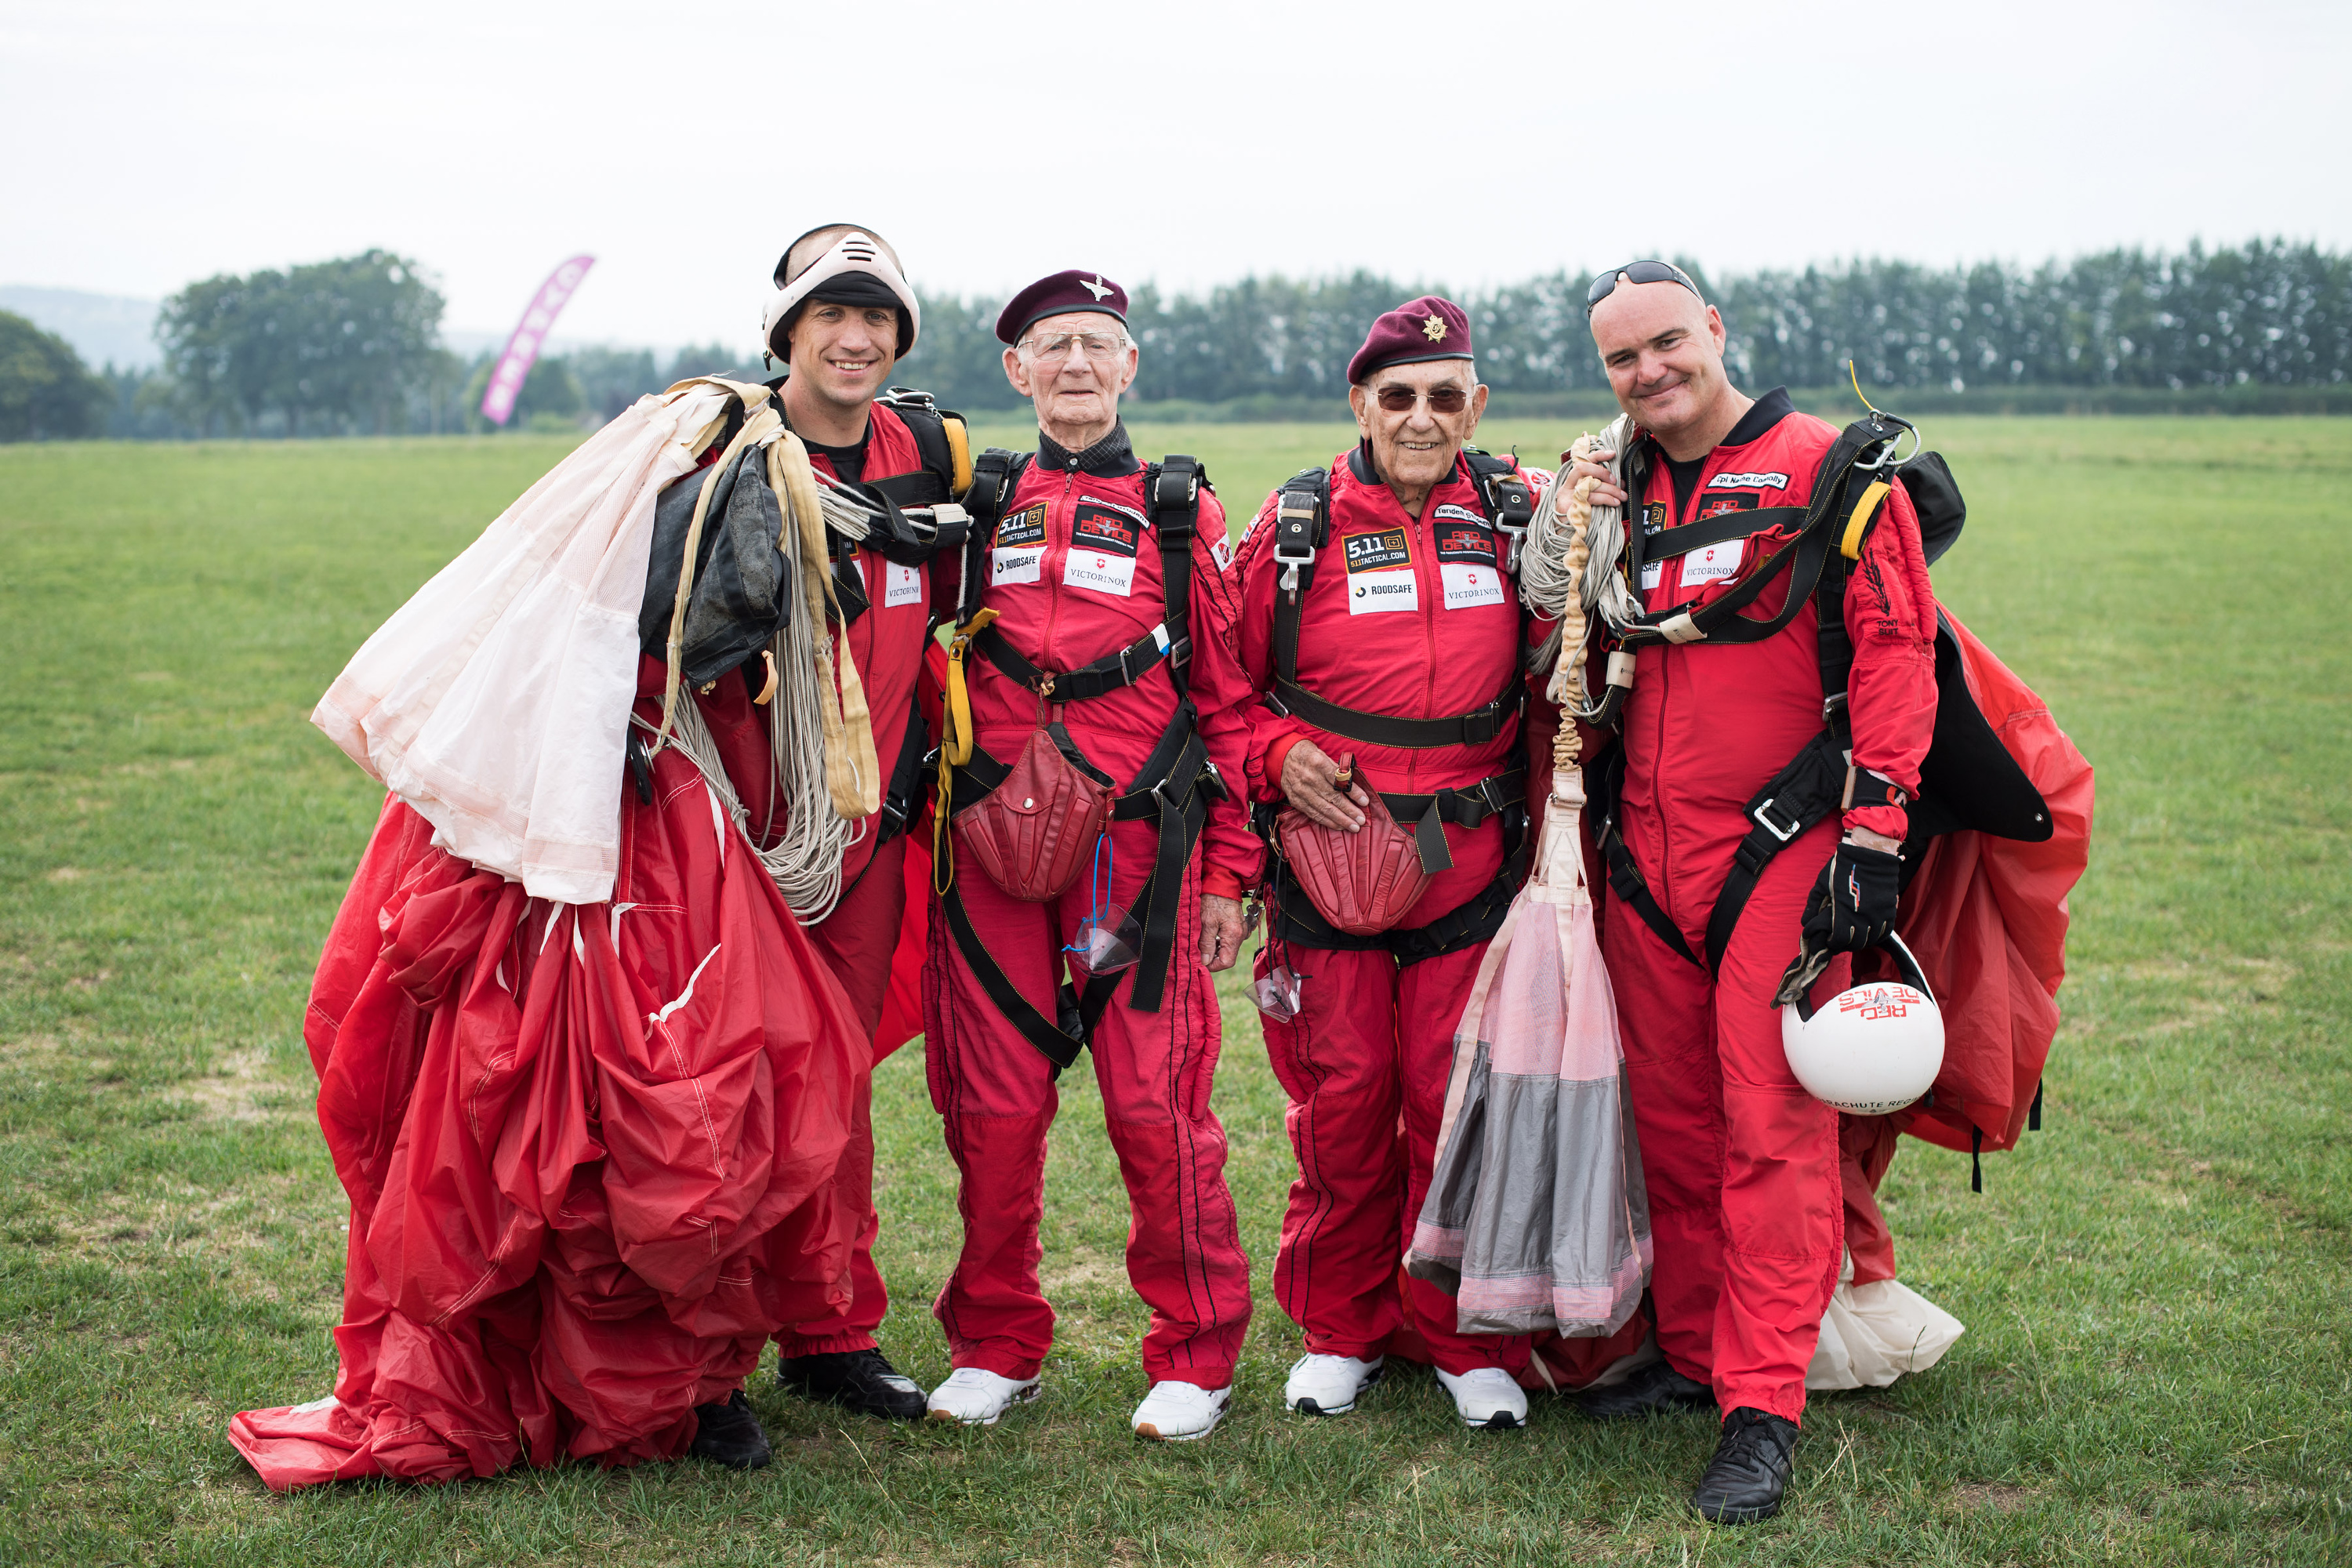 Fred Glover and Ted Pieri, two D-Day veterans who are both 90 years old pose for a group photograph with members of the Red Devils Parachute display team after they parachuted into Sarum Airfield, Wiltshire, 72 years after D-Day having earlier in the month jumped into Merville Battery in France.